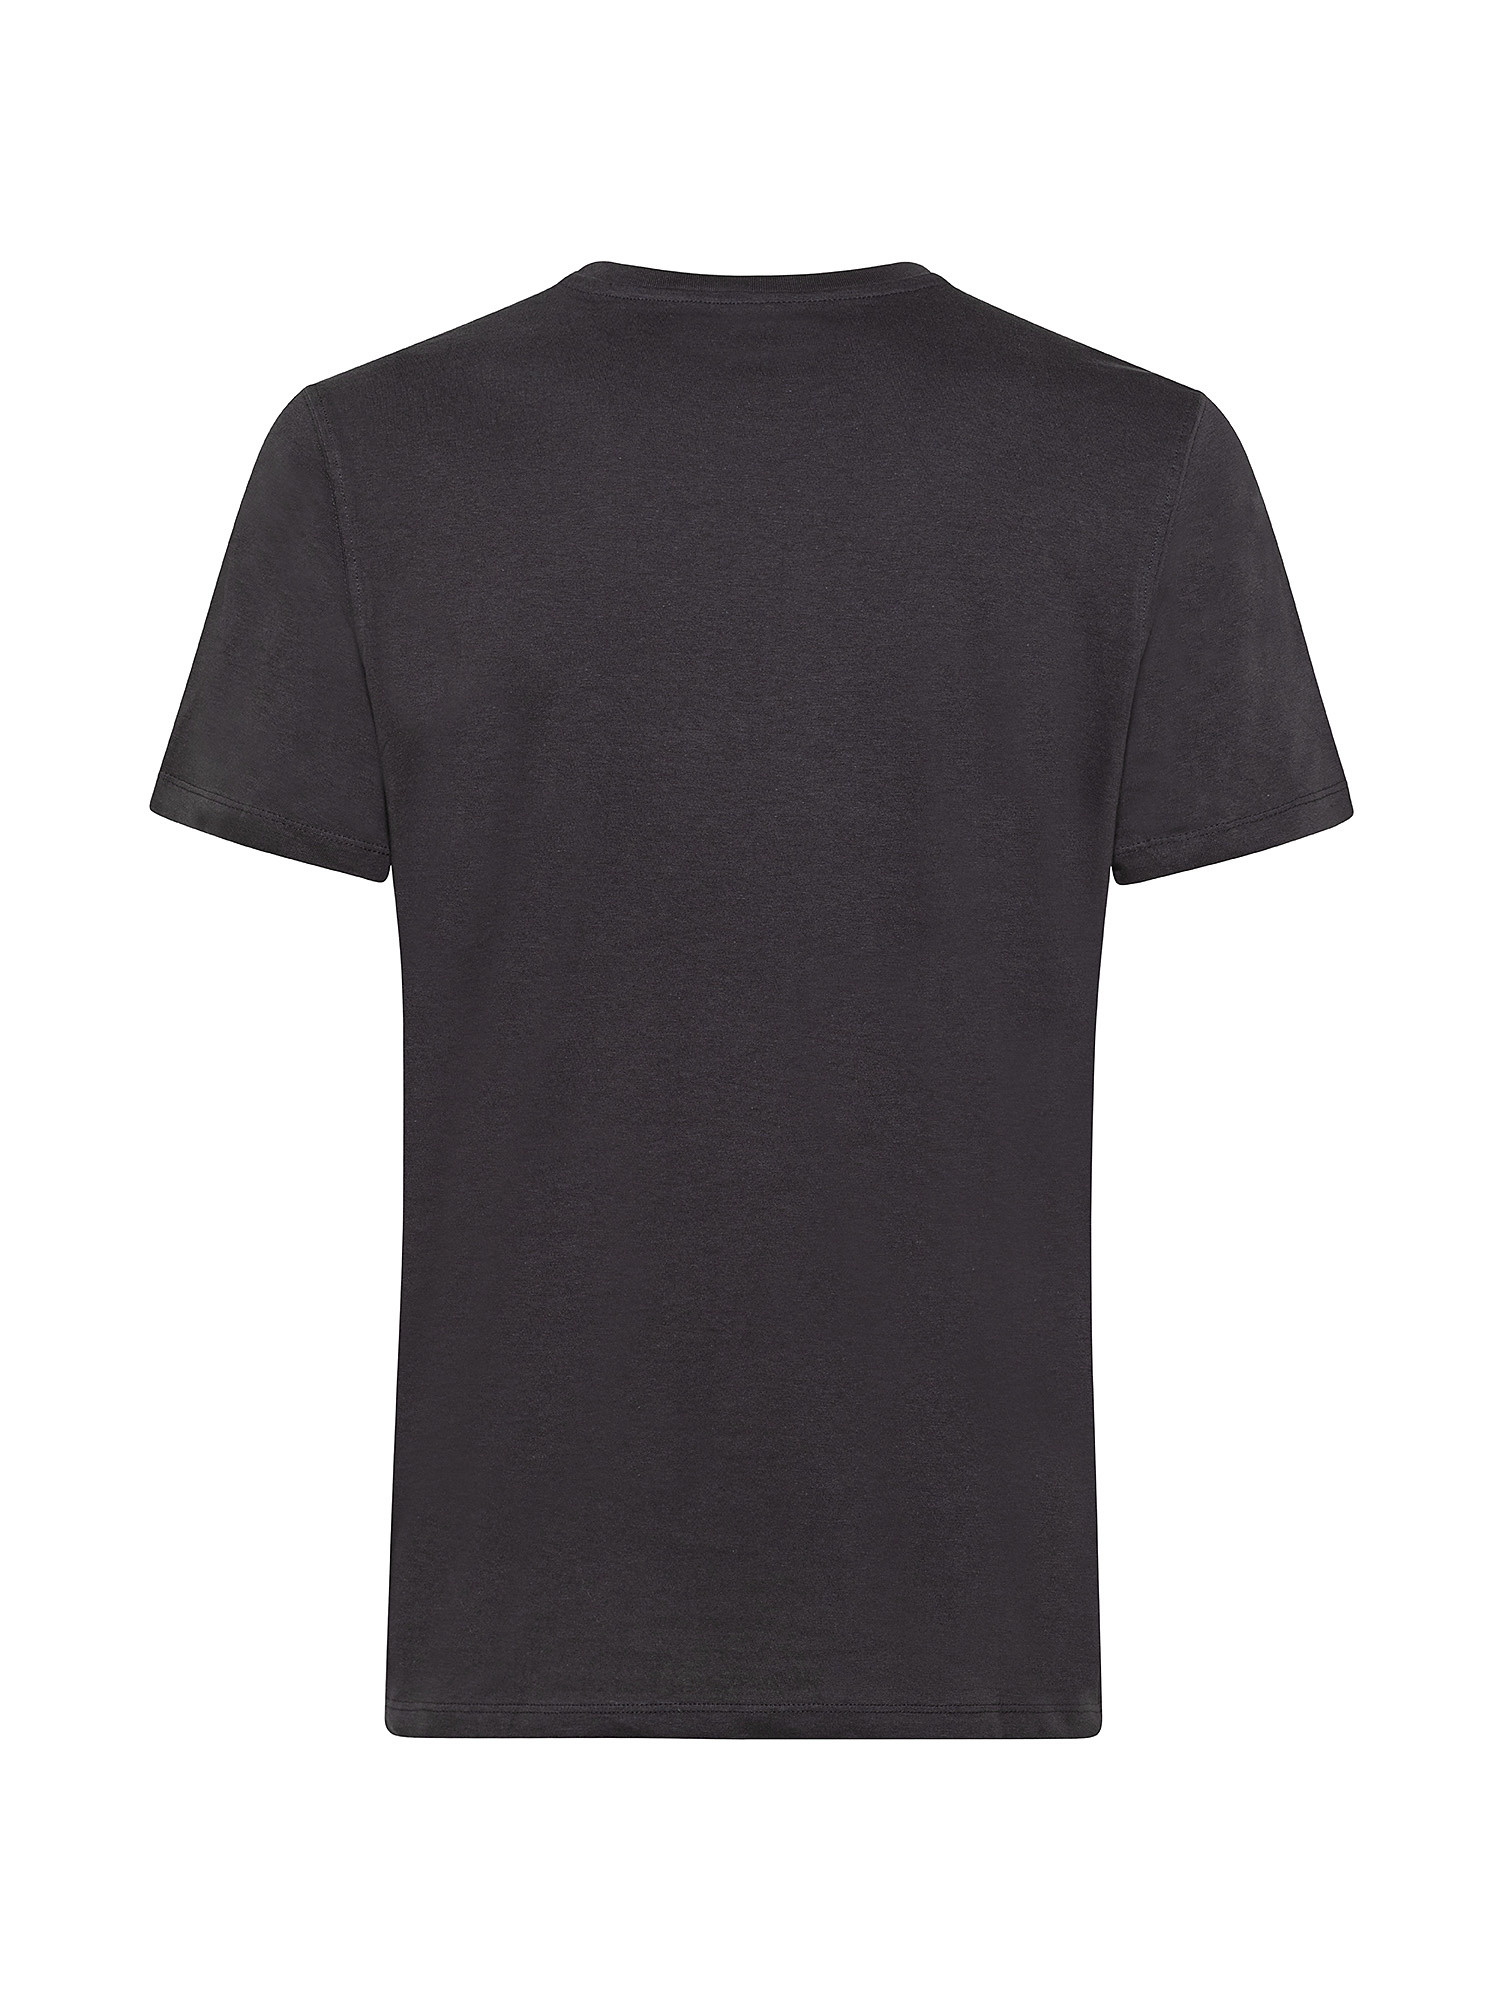 T-shirt with print, Anthracite, large image number 1